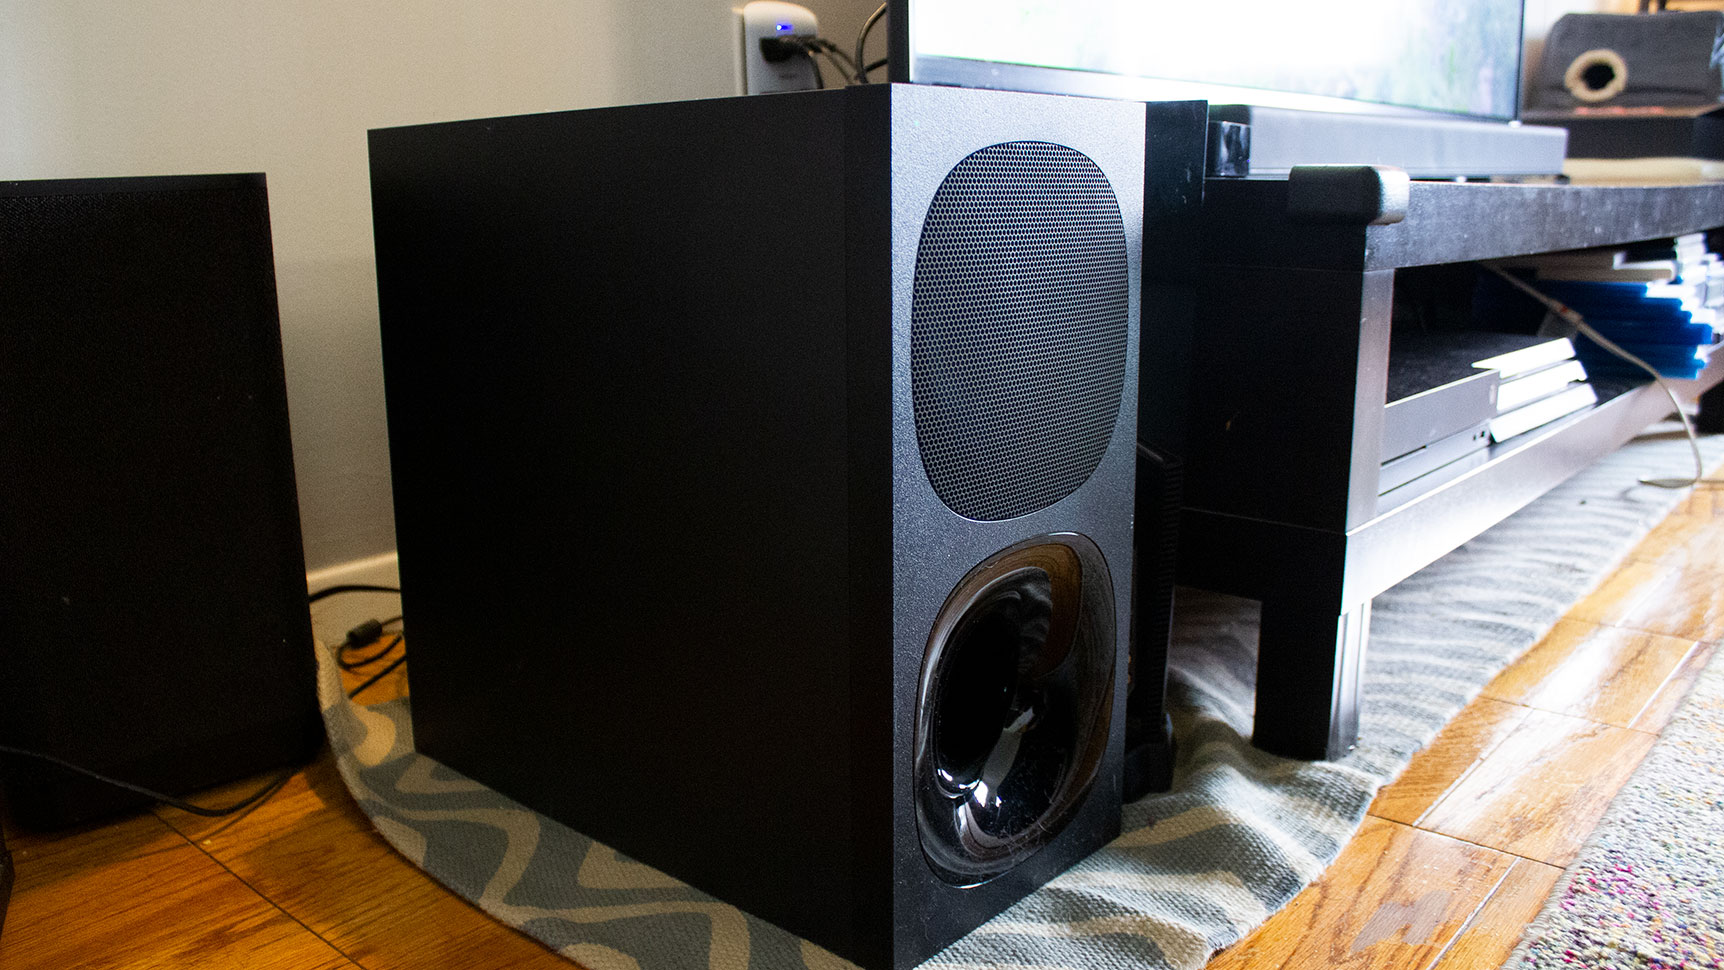 The Sony a Case Great Soundbars Dolby HT-G700 for Budget Atmos Makes